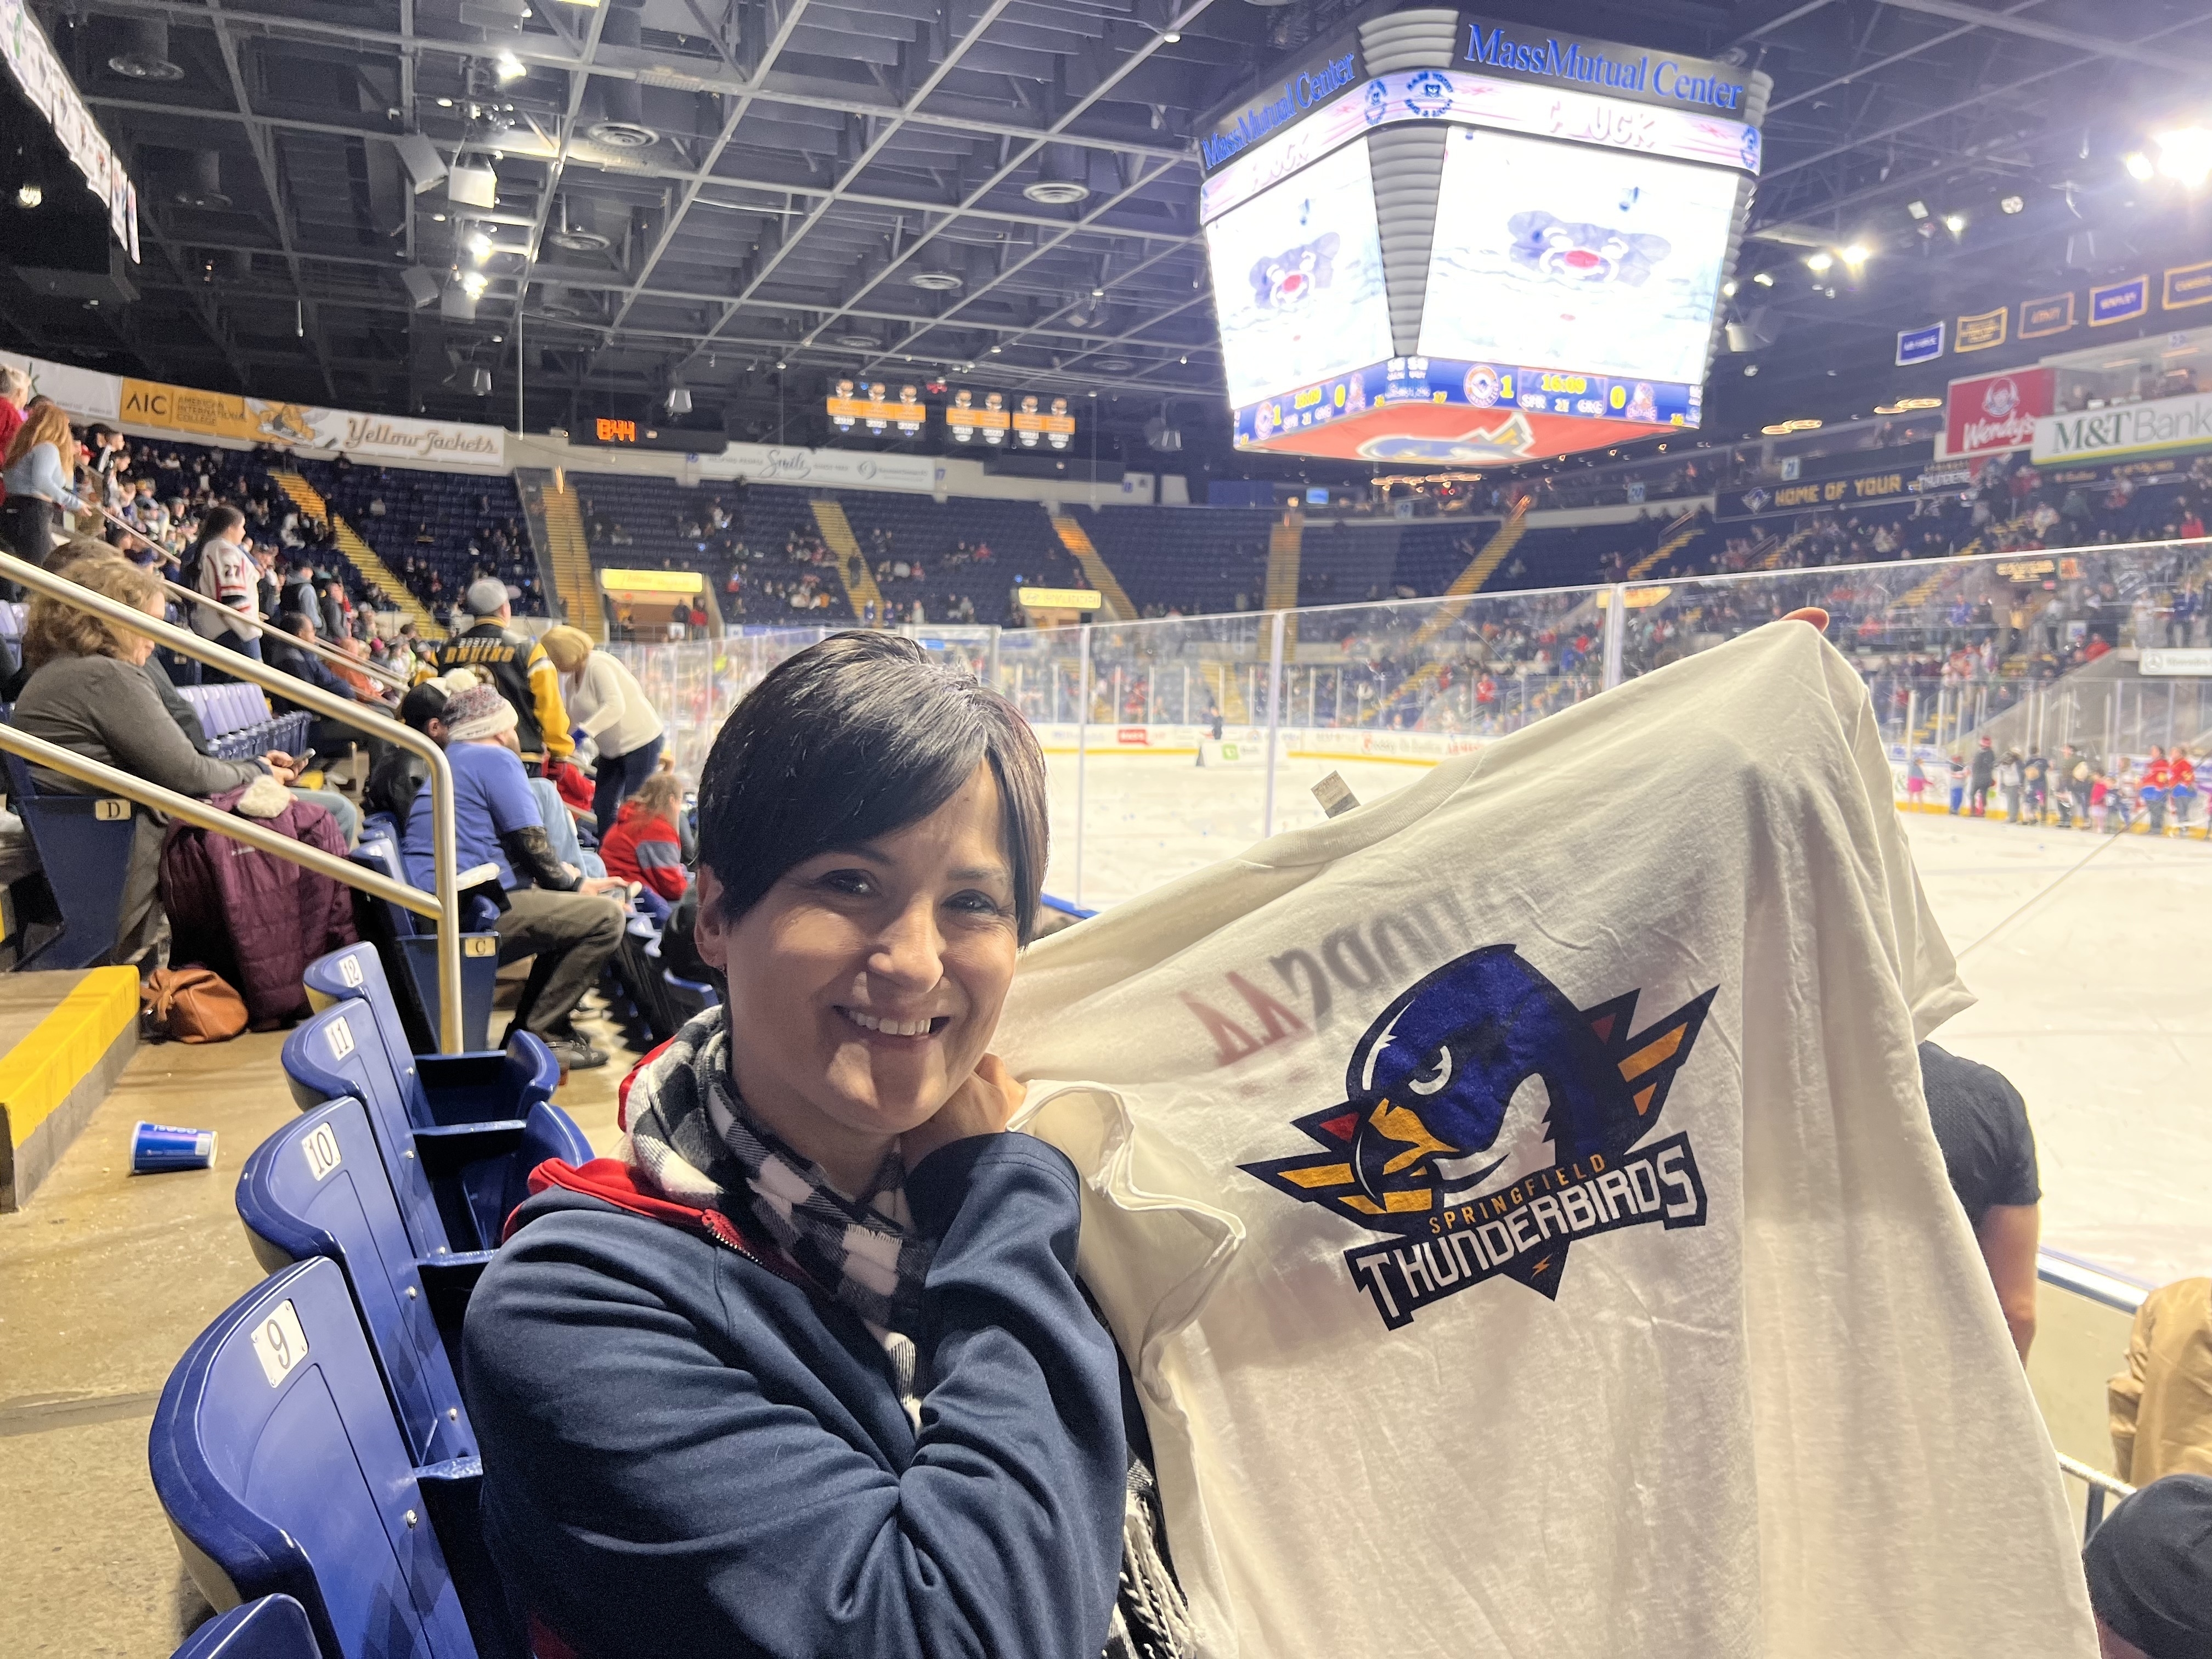 Springfield Thunderbirds took on the Grand Rapids Griffins